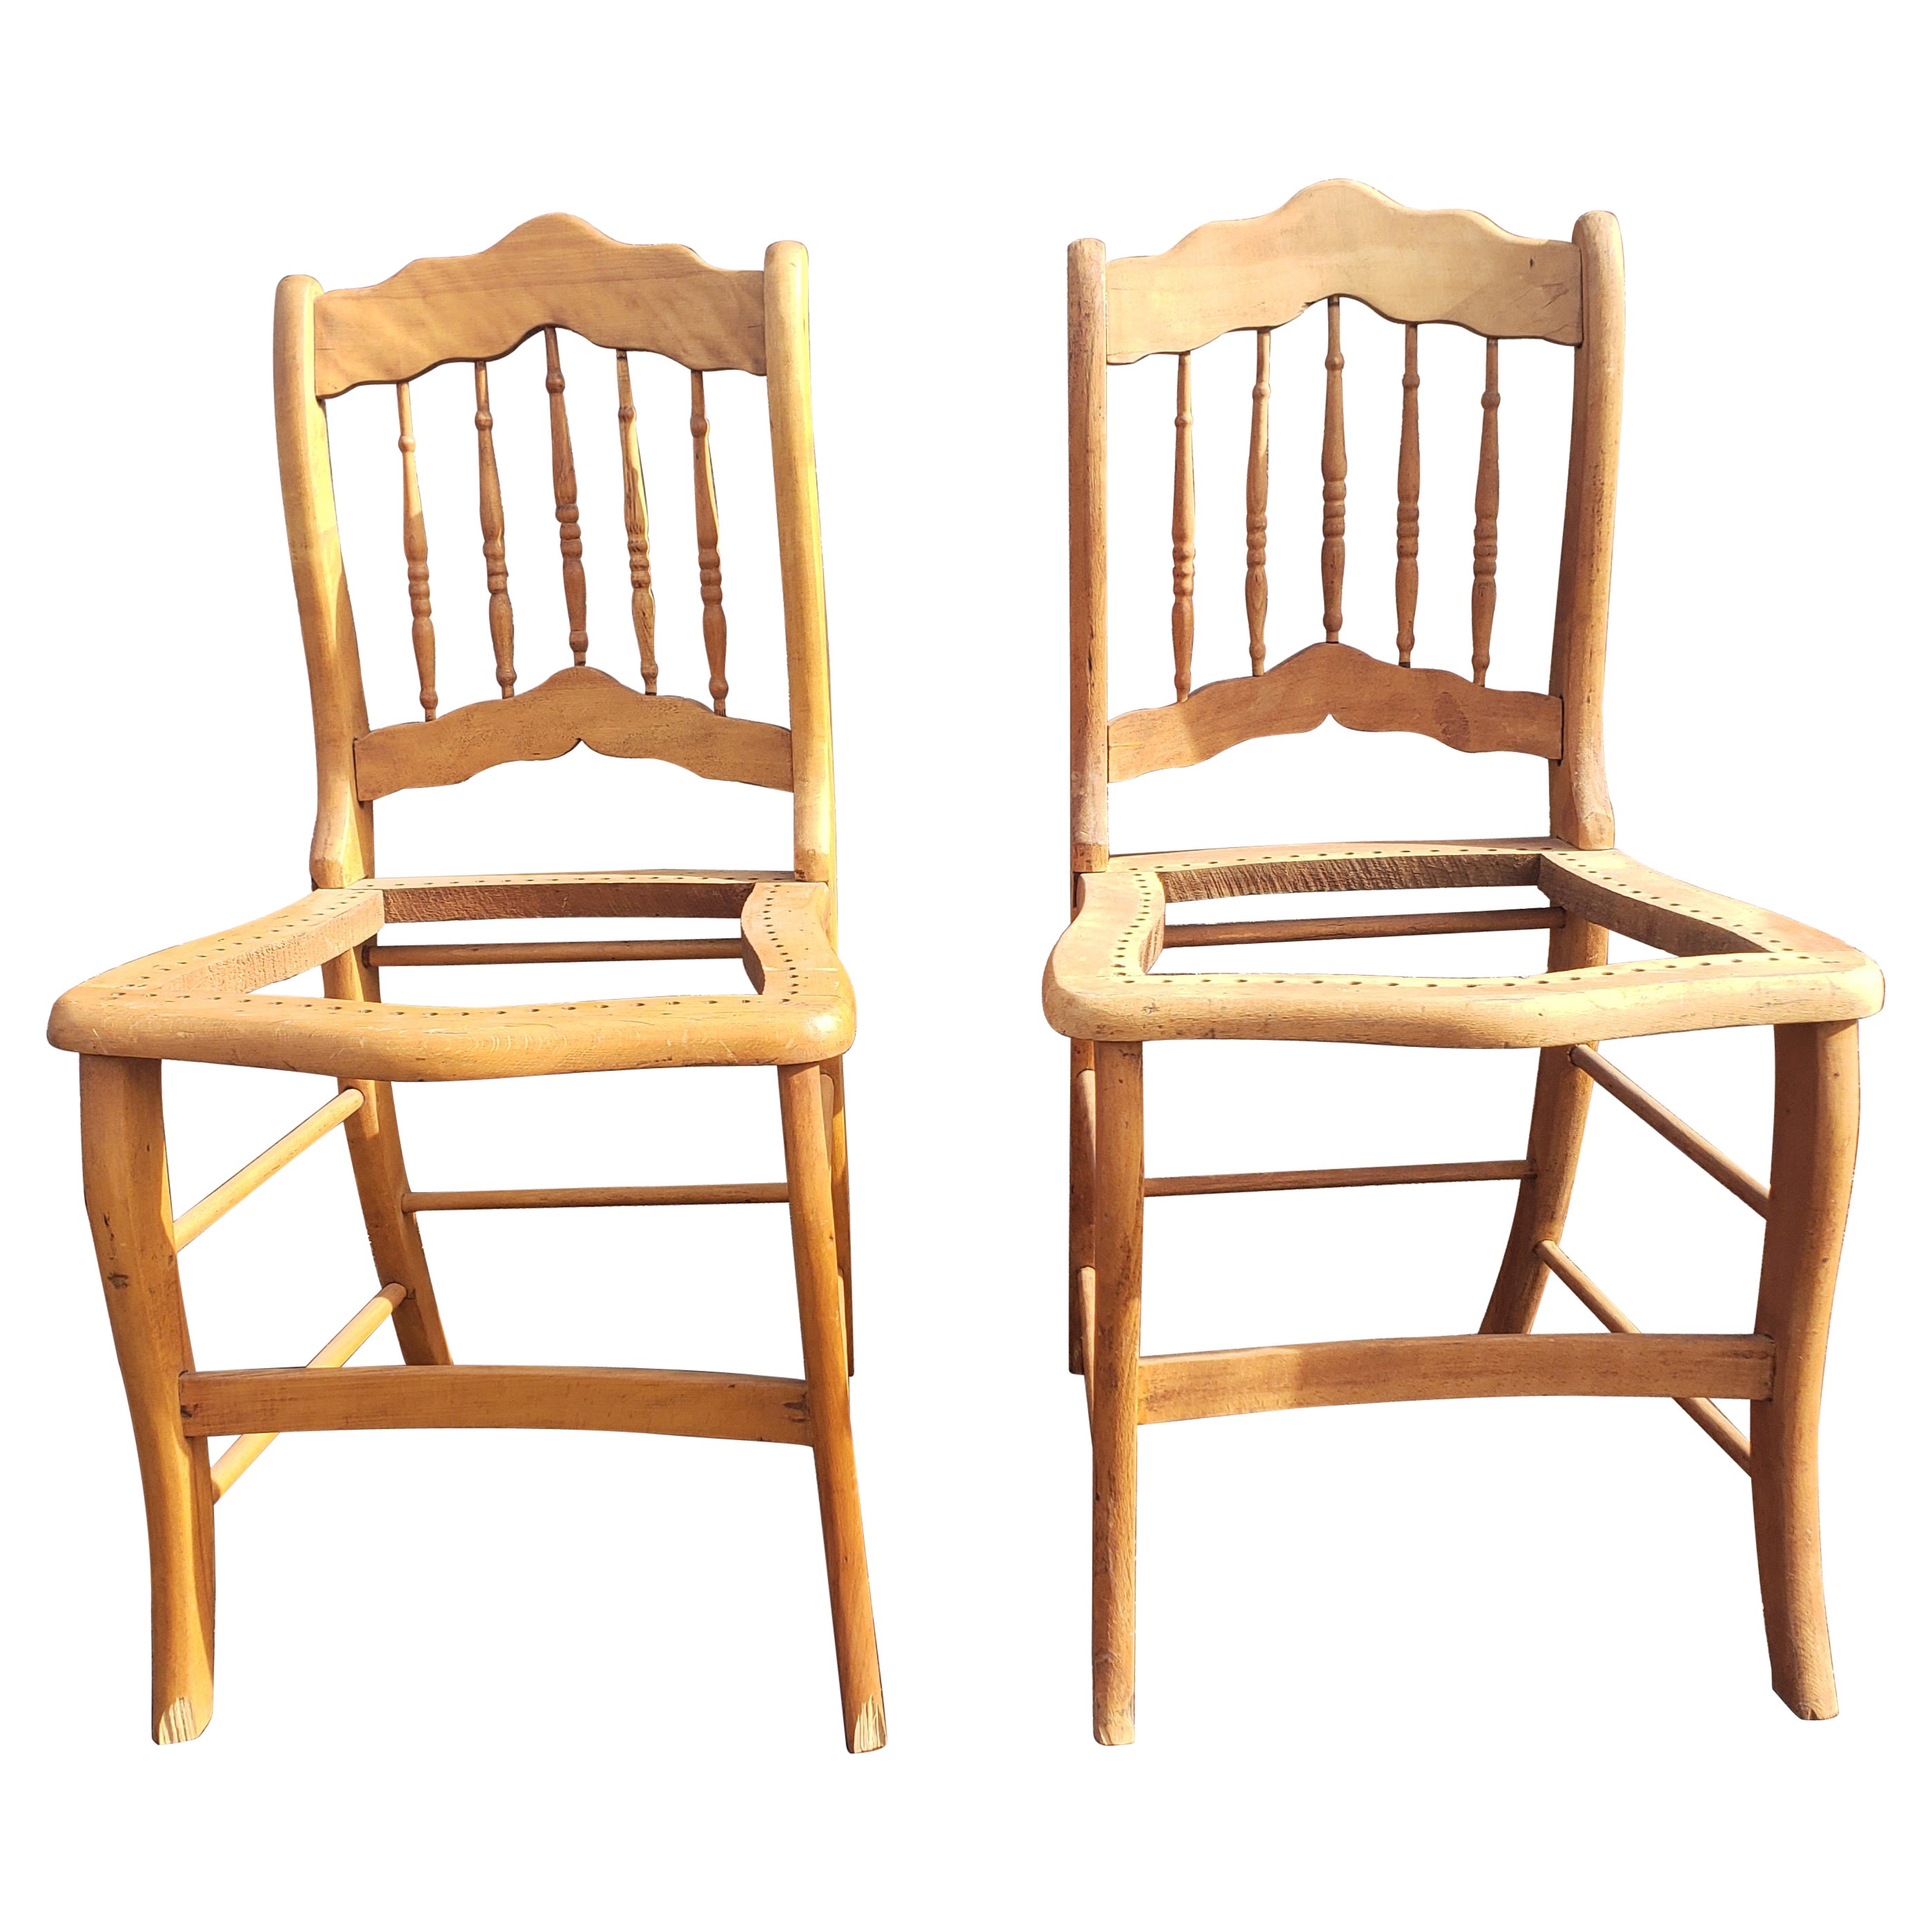 Early American Maple Side Chair Frames, a Pair, circa 1880s For Sale